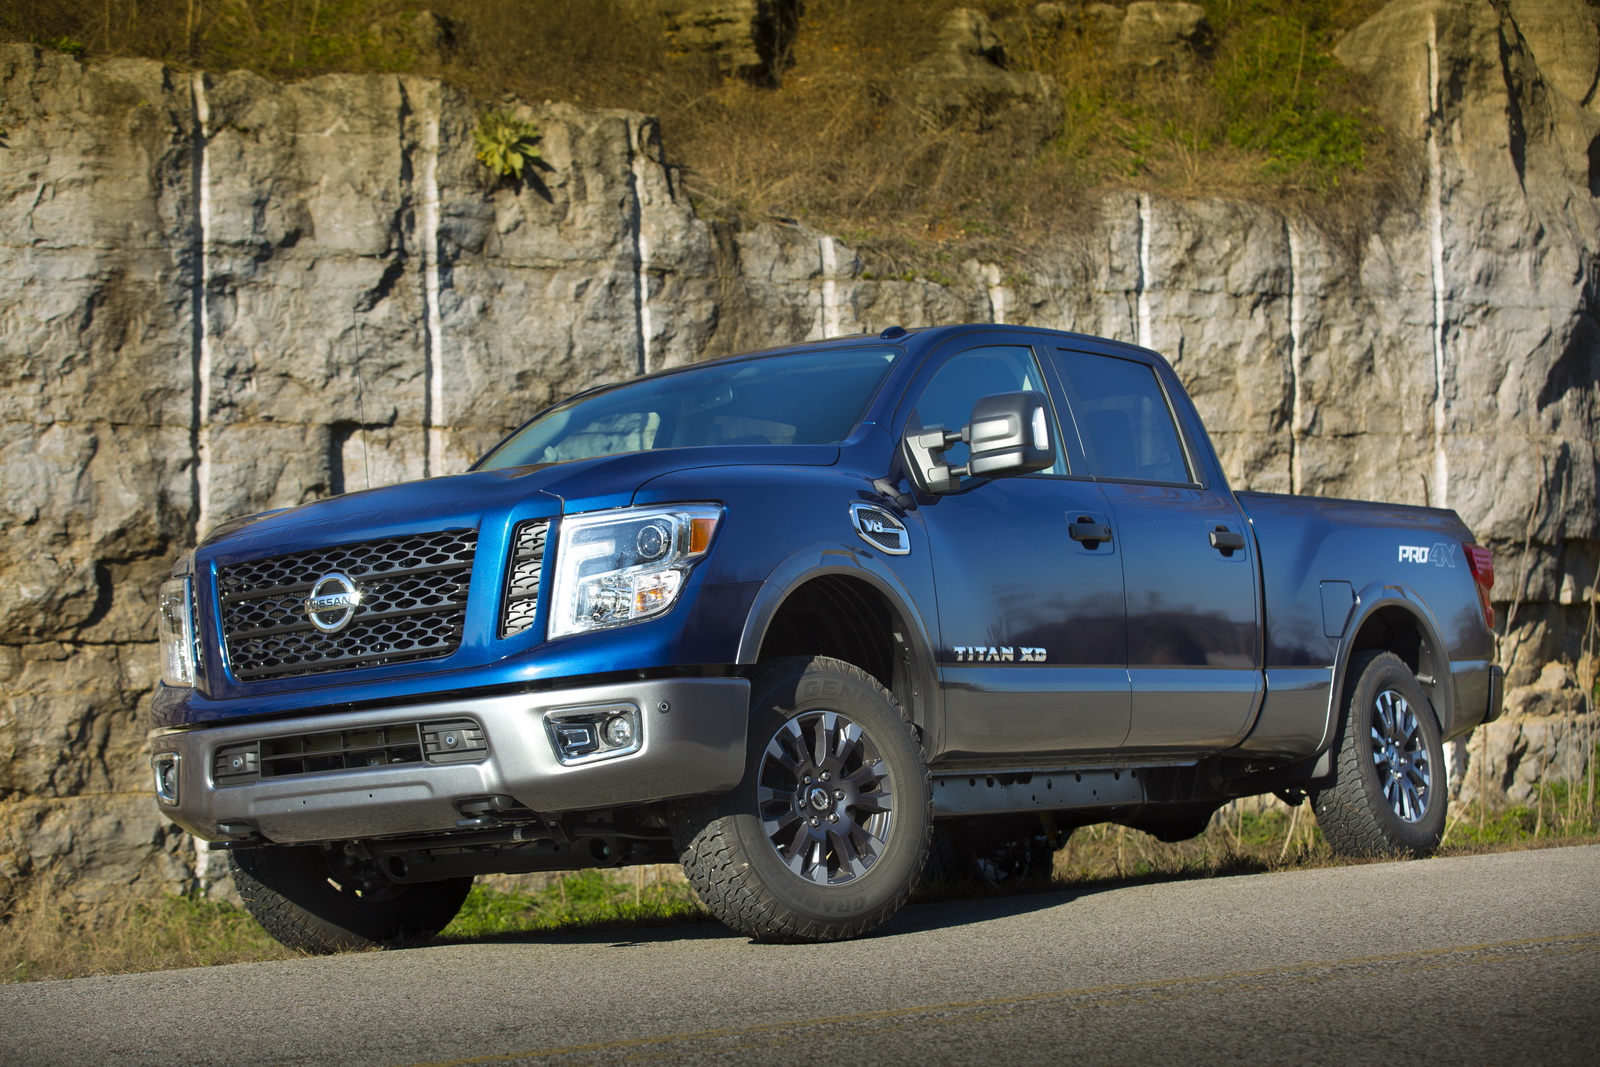 NASHVILLE, Tenn. (Dec. 15, 2015) – Nissan announced today that a new 5.6-liter Endurance® V8 gasoline engine, assembled in Decherd, Tennessee, will be available in the all-new TITAN and TITAN XD full-size pickup trucks, completing the first phase of the “American TITAN” story. The engine features four-valves per cylinder, Variable Valve Event & Lift and Direct Injection, and is rated at 390 horsepower @ 5,800 rpm and 401 lb-ft of torque @ 4,000 rpm.